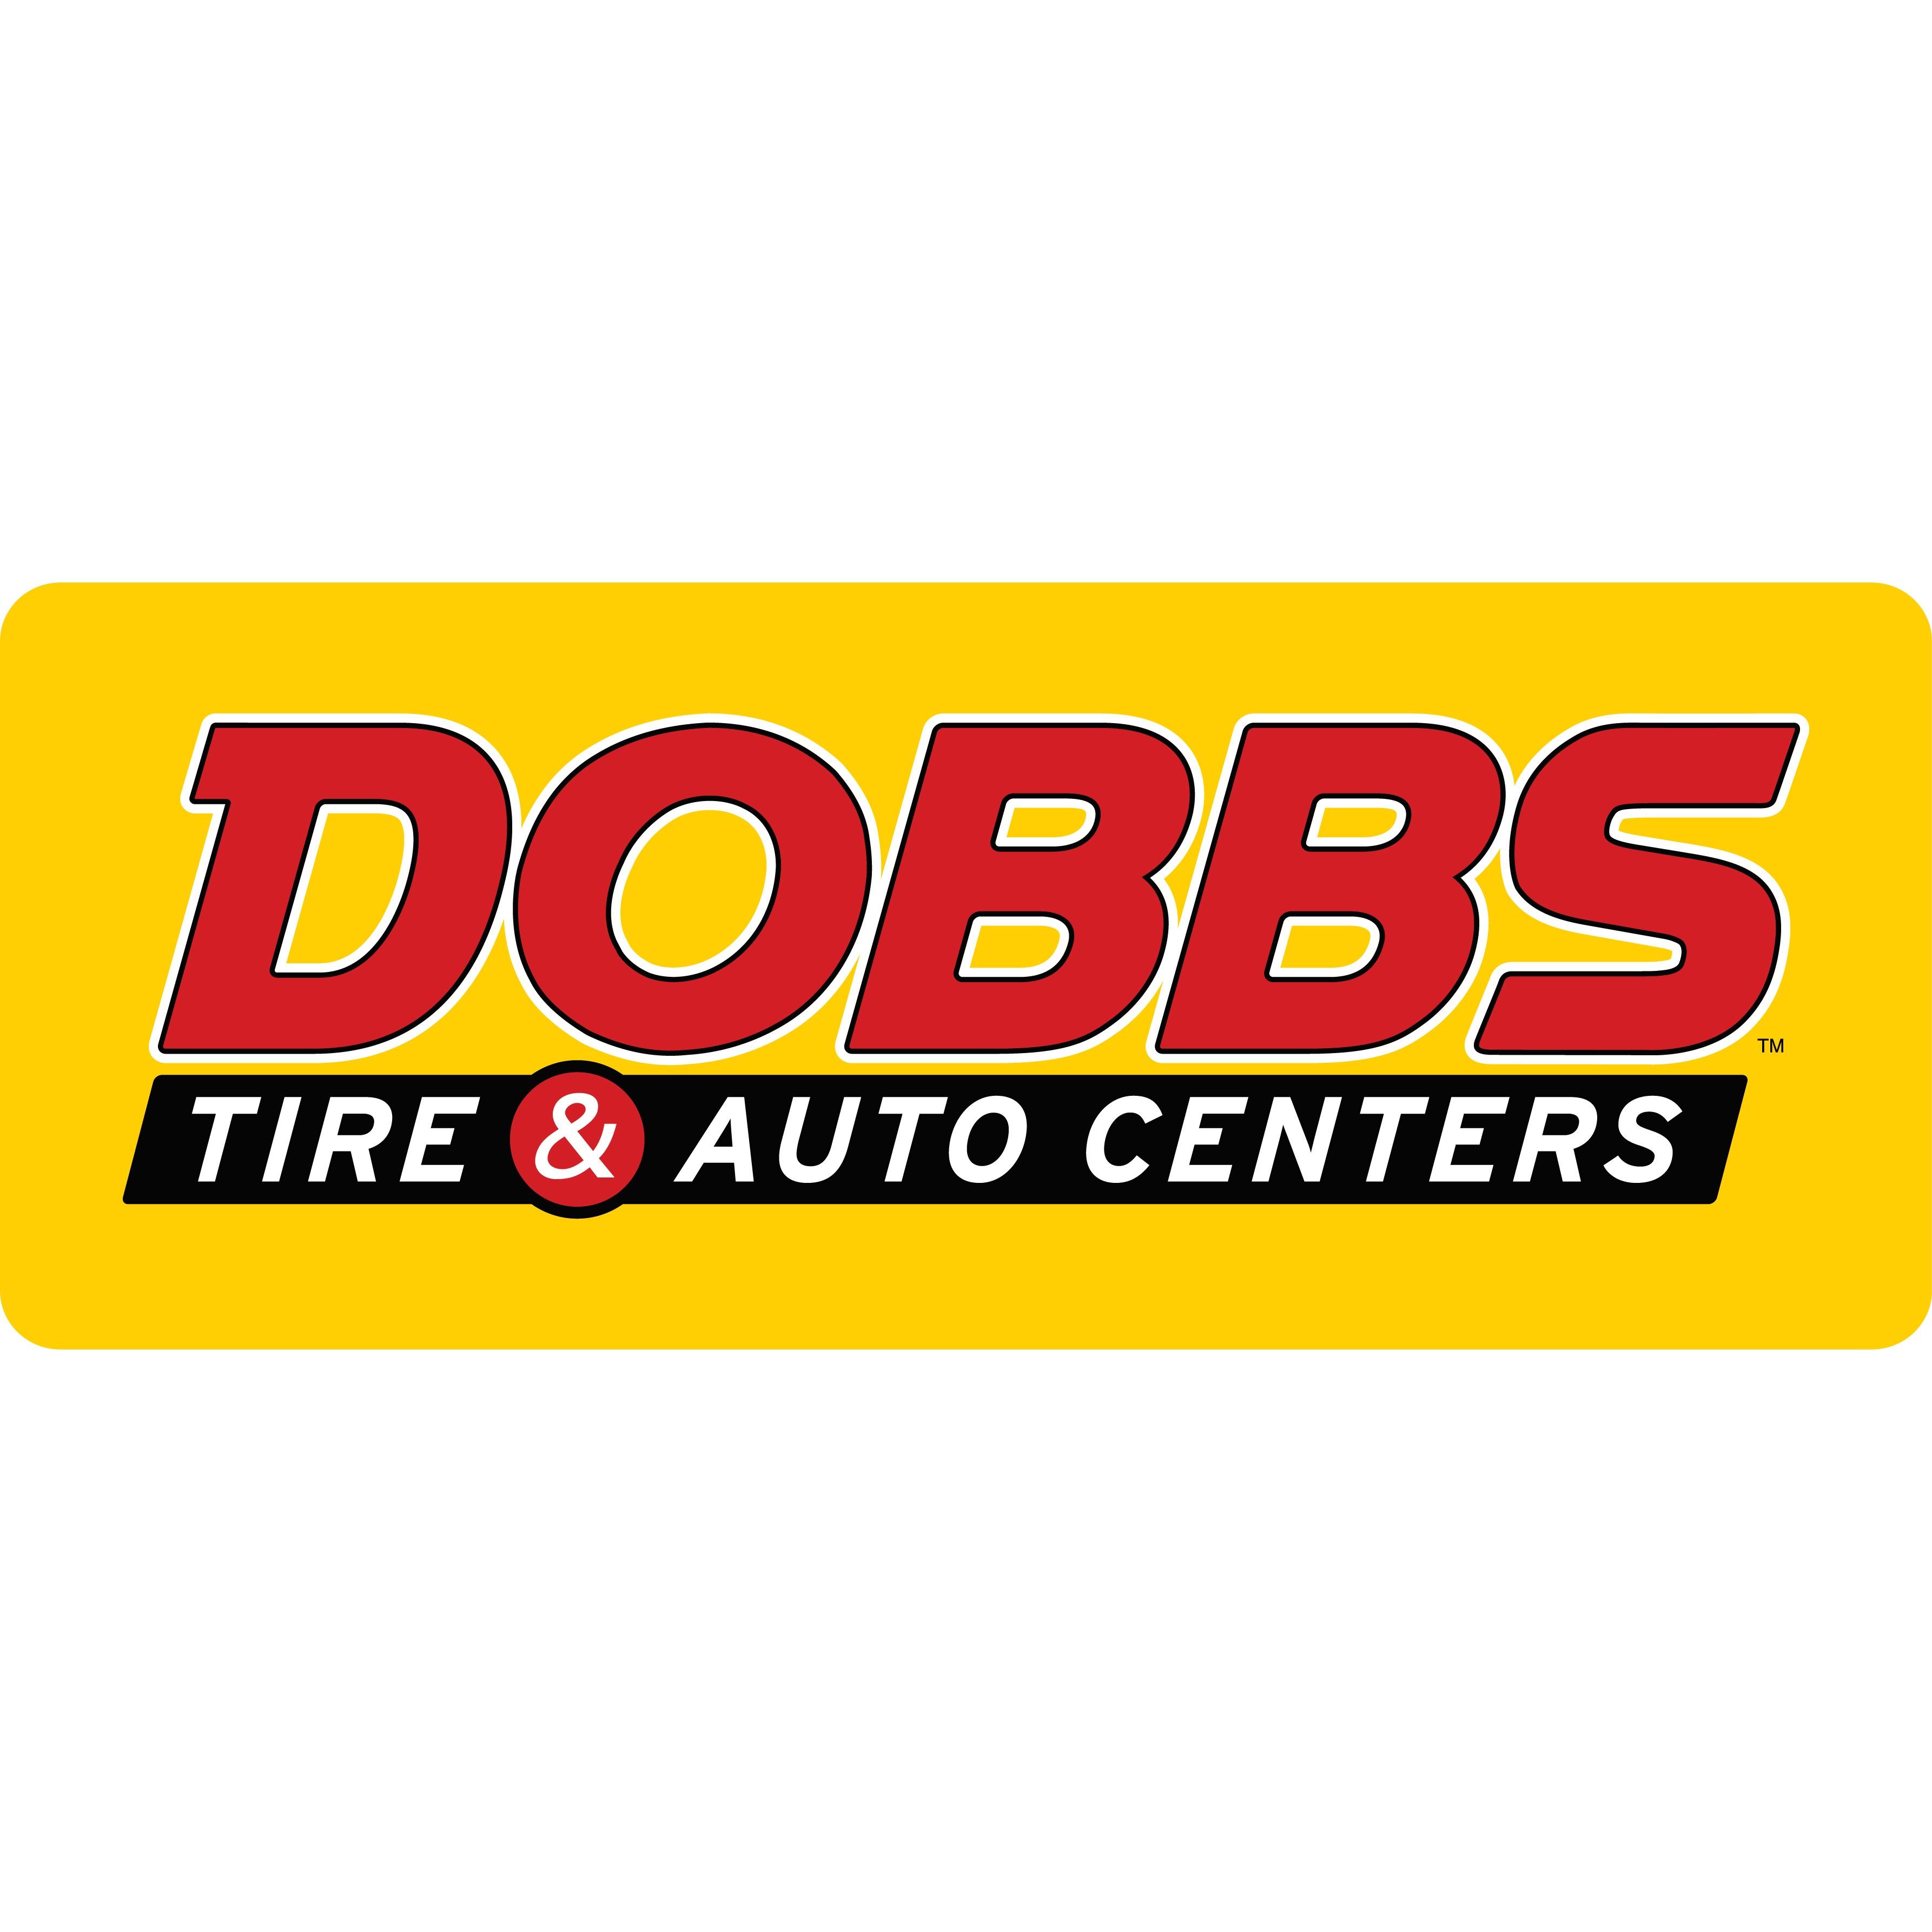 Dobbs Tire And Auto Center Coupons near me in Florissant | 8coupons